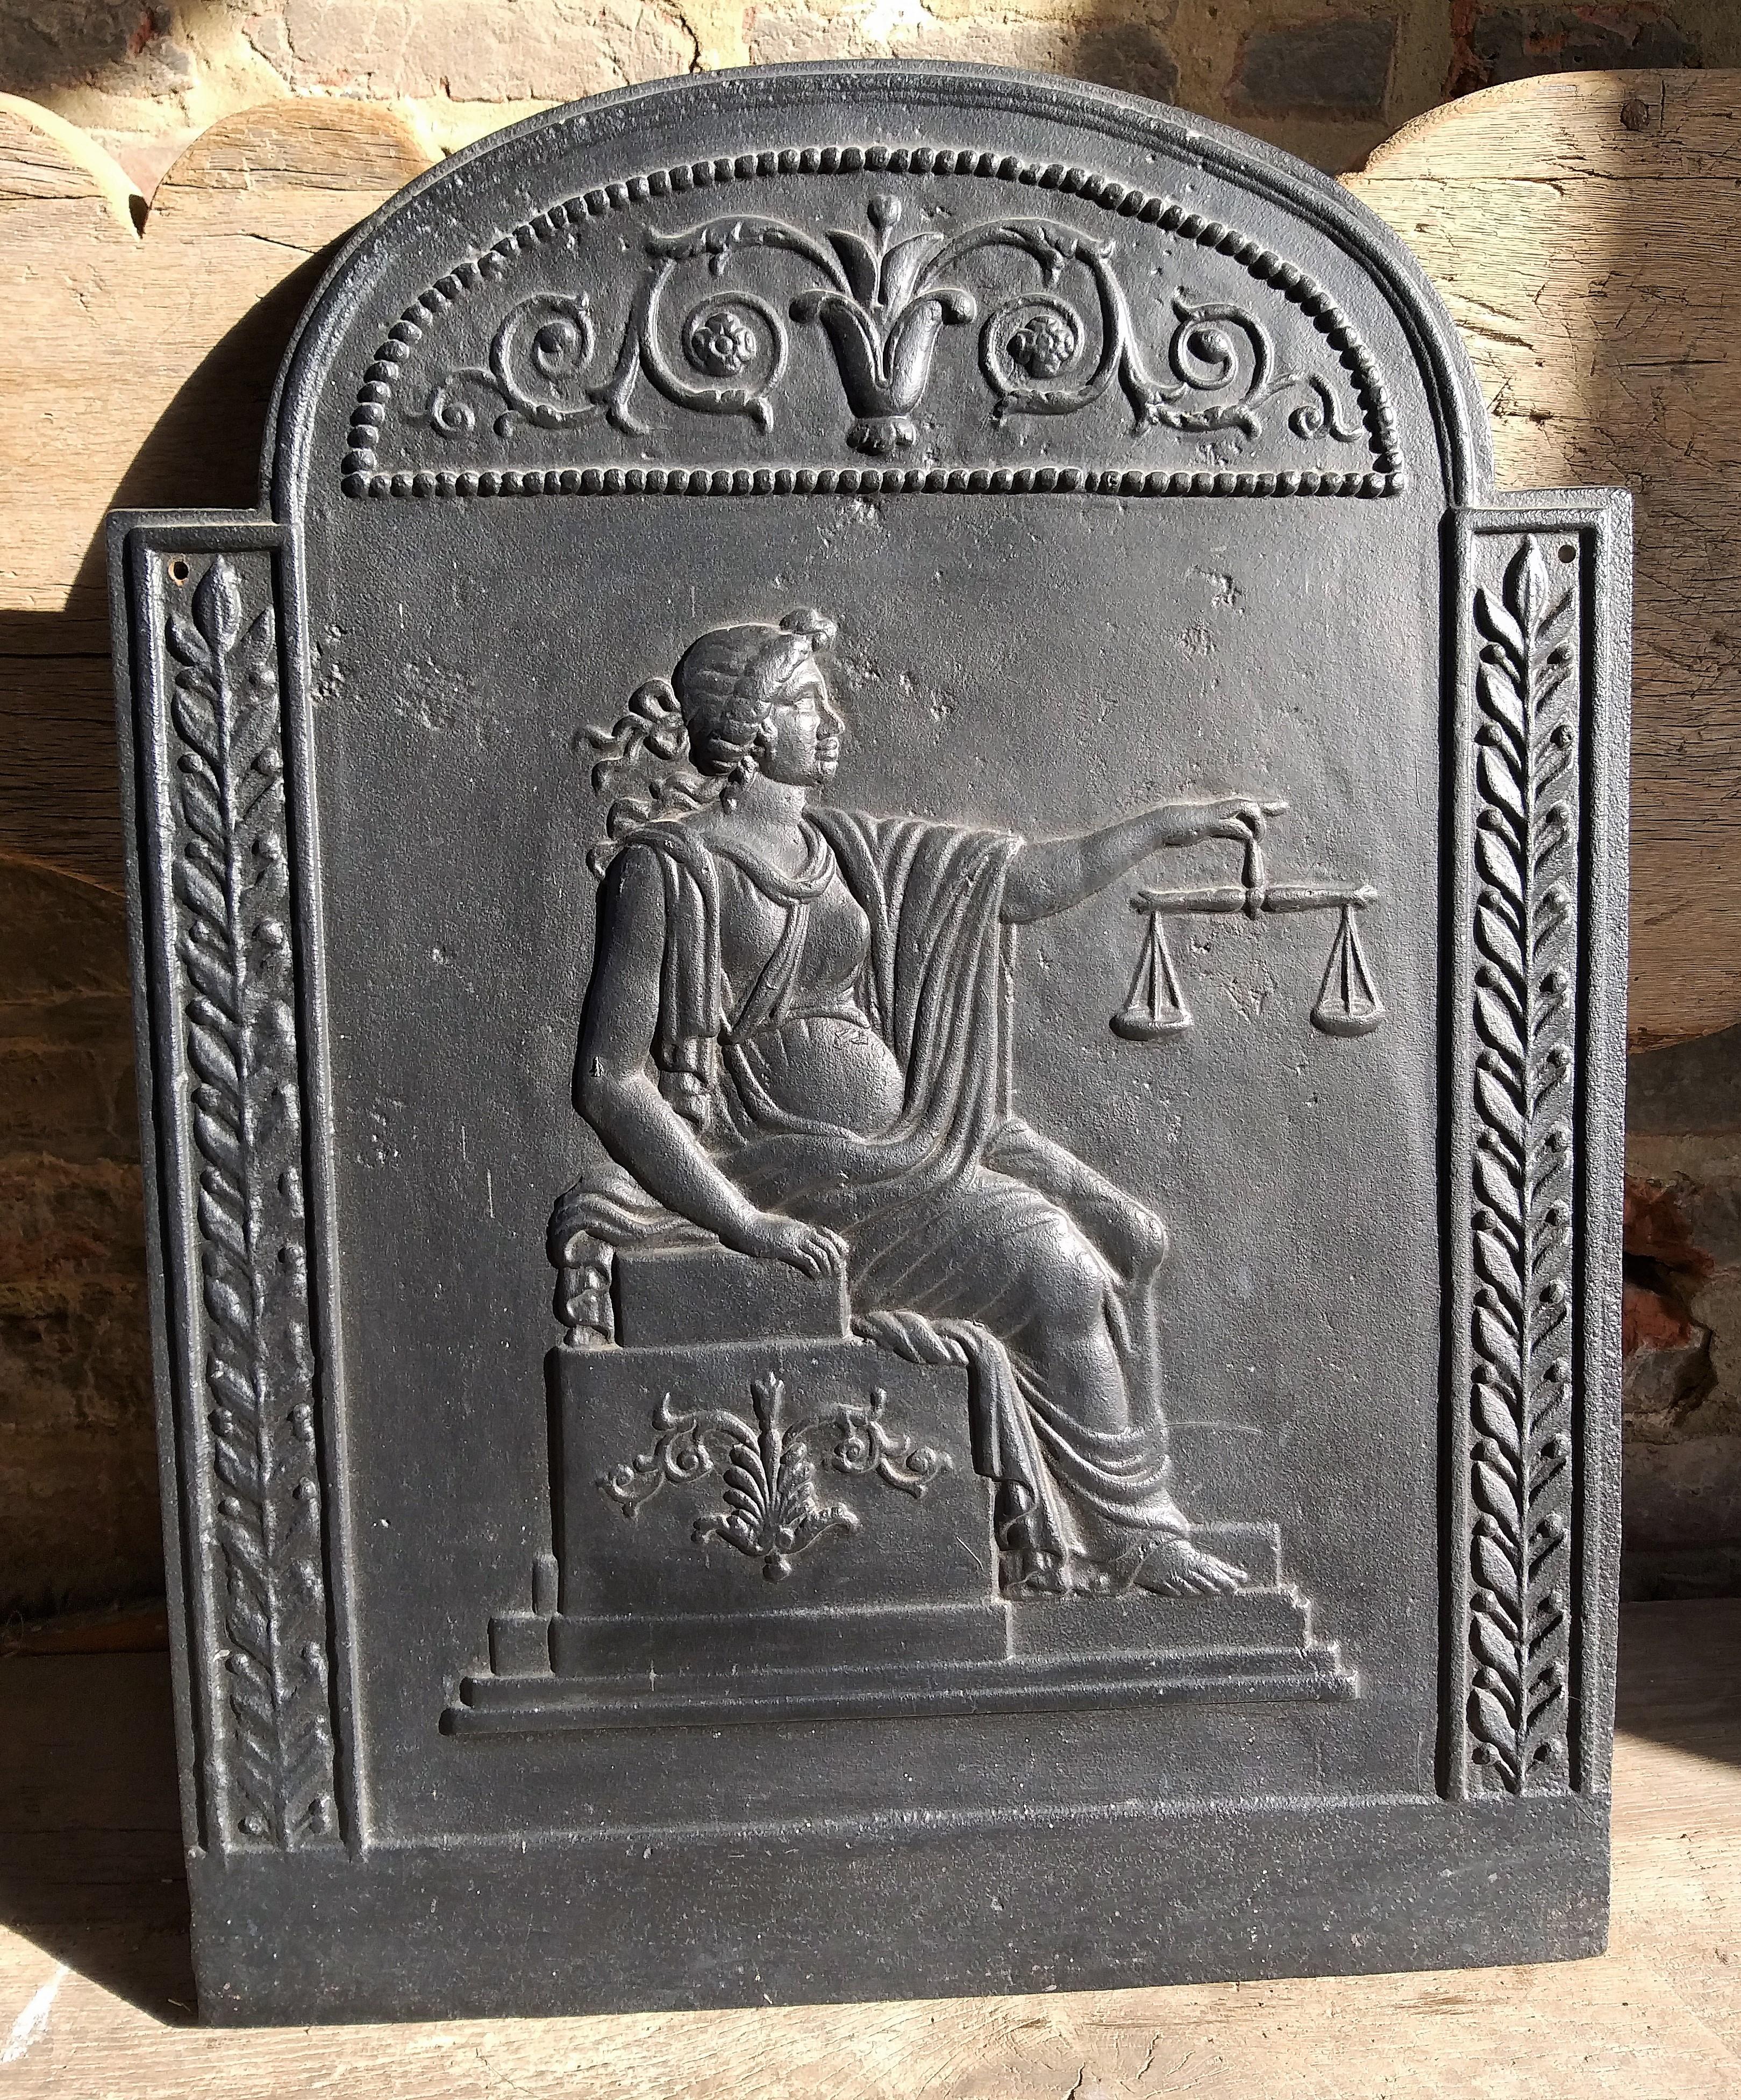 Fireback or backsplash in very good condition that dates back to early nineteenth century.
It shows Lady Justice, it originates from the ancient Roman. She is an Allegorical personification
of the moral force in judicial systems. The symbols are